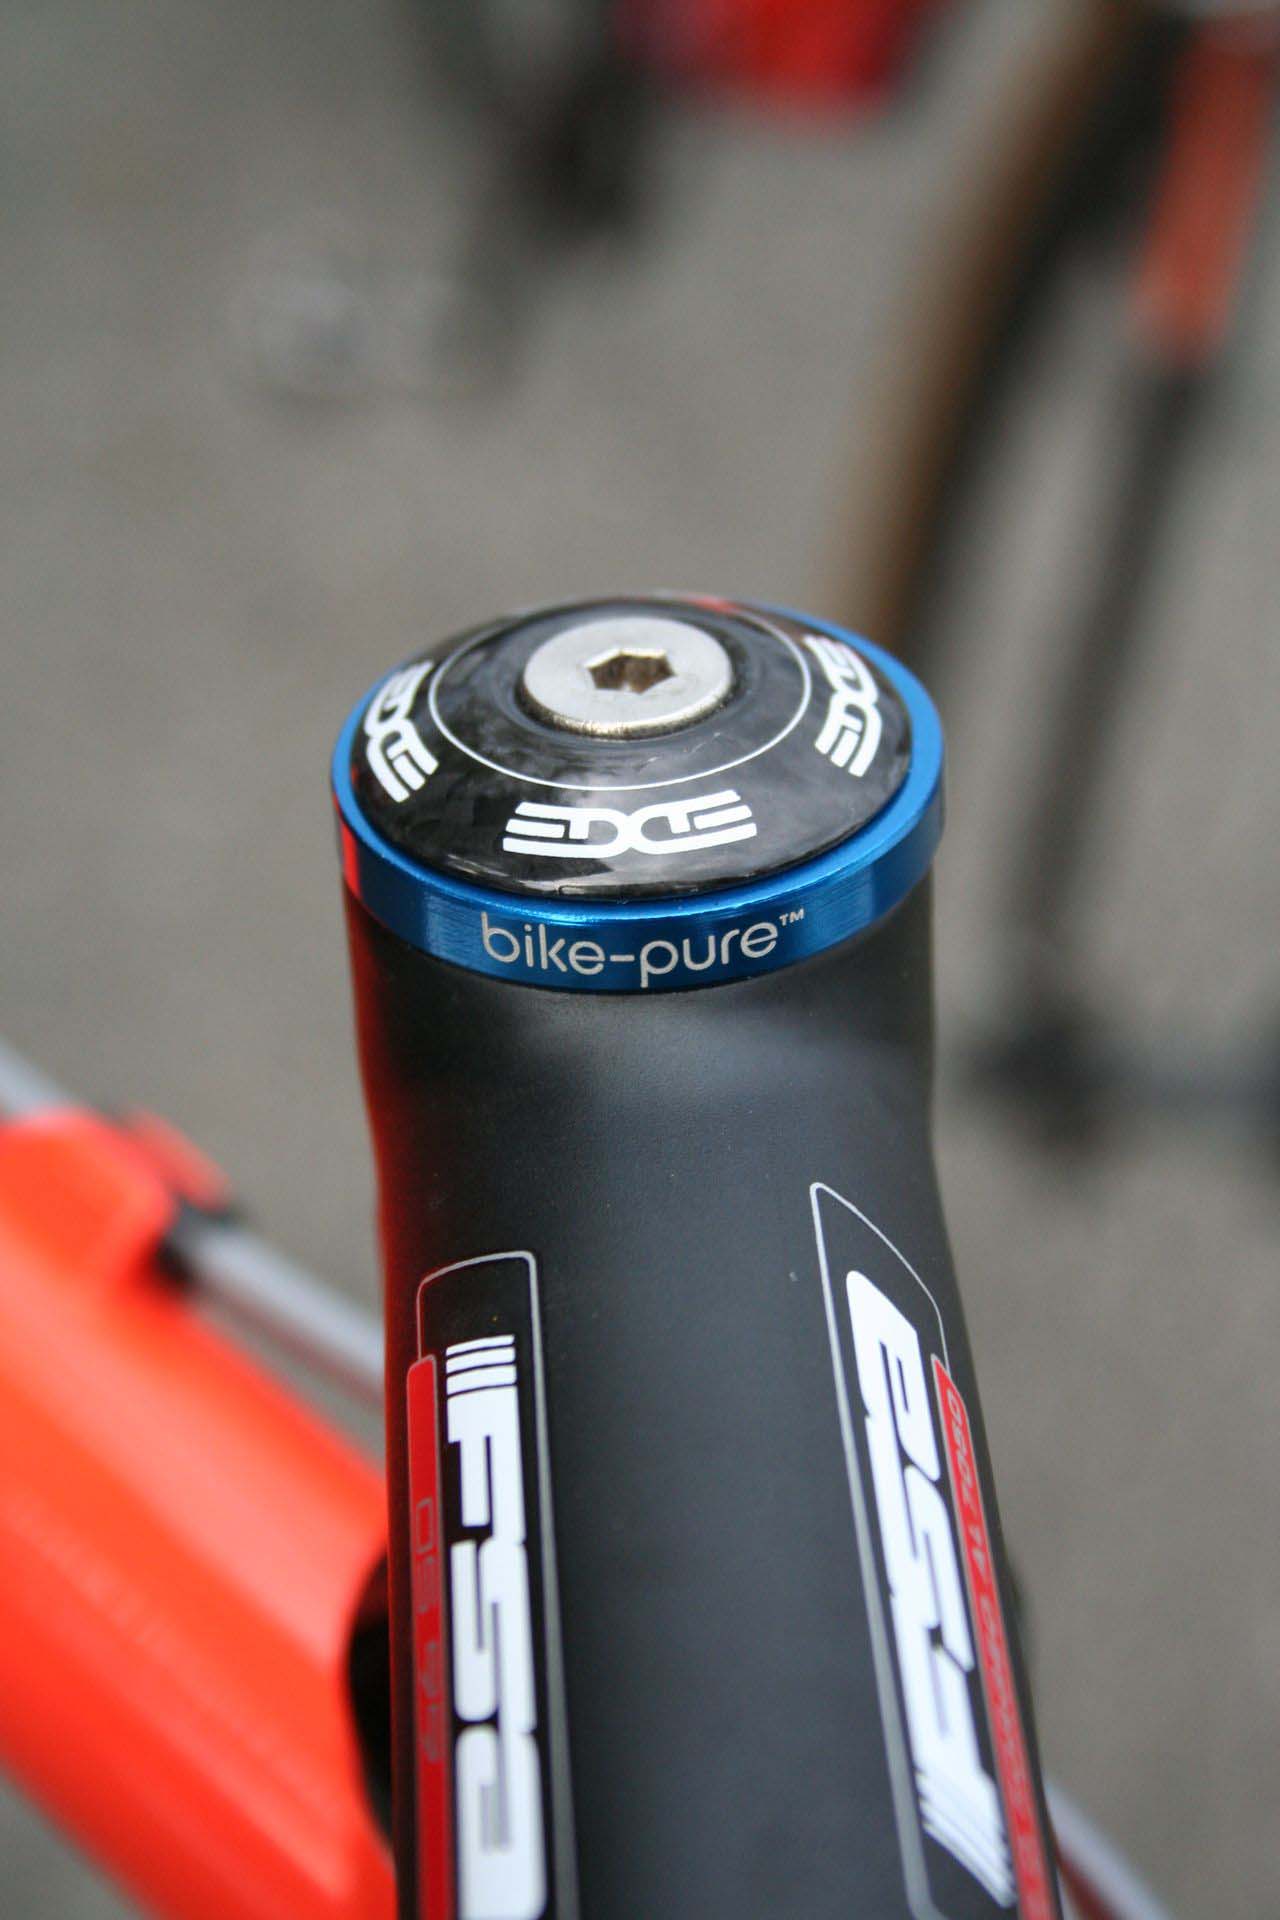 Wyman is in good company as one of the riders who has pledged to Bike Pure. ? Cyclocross Magazine